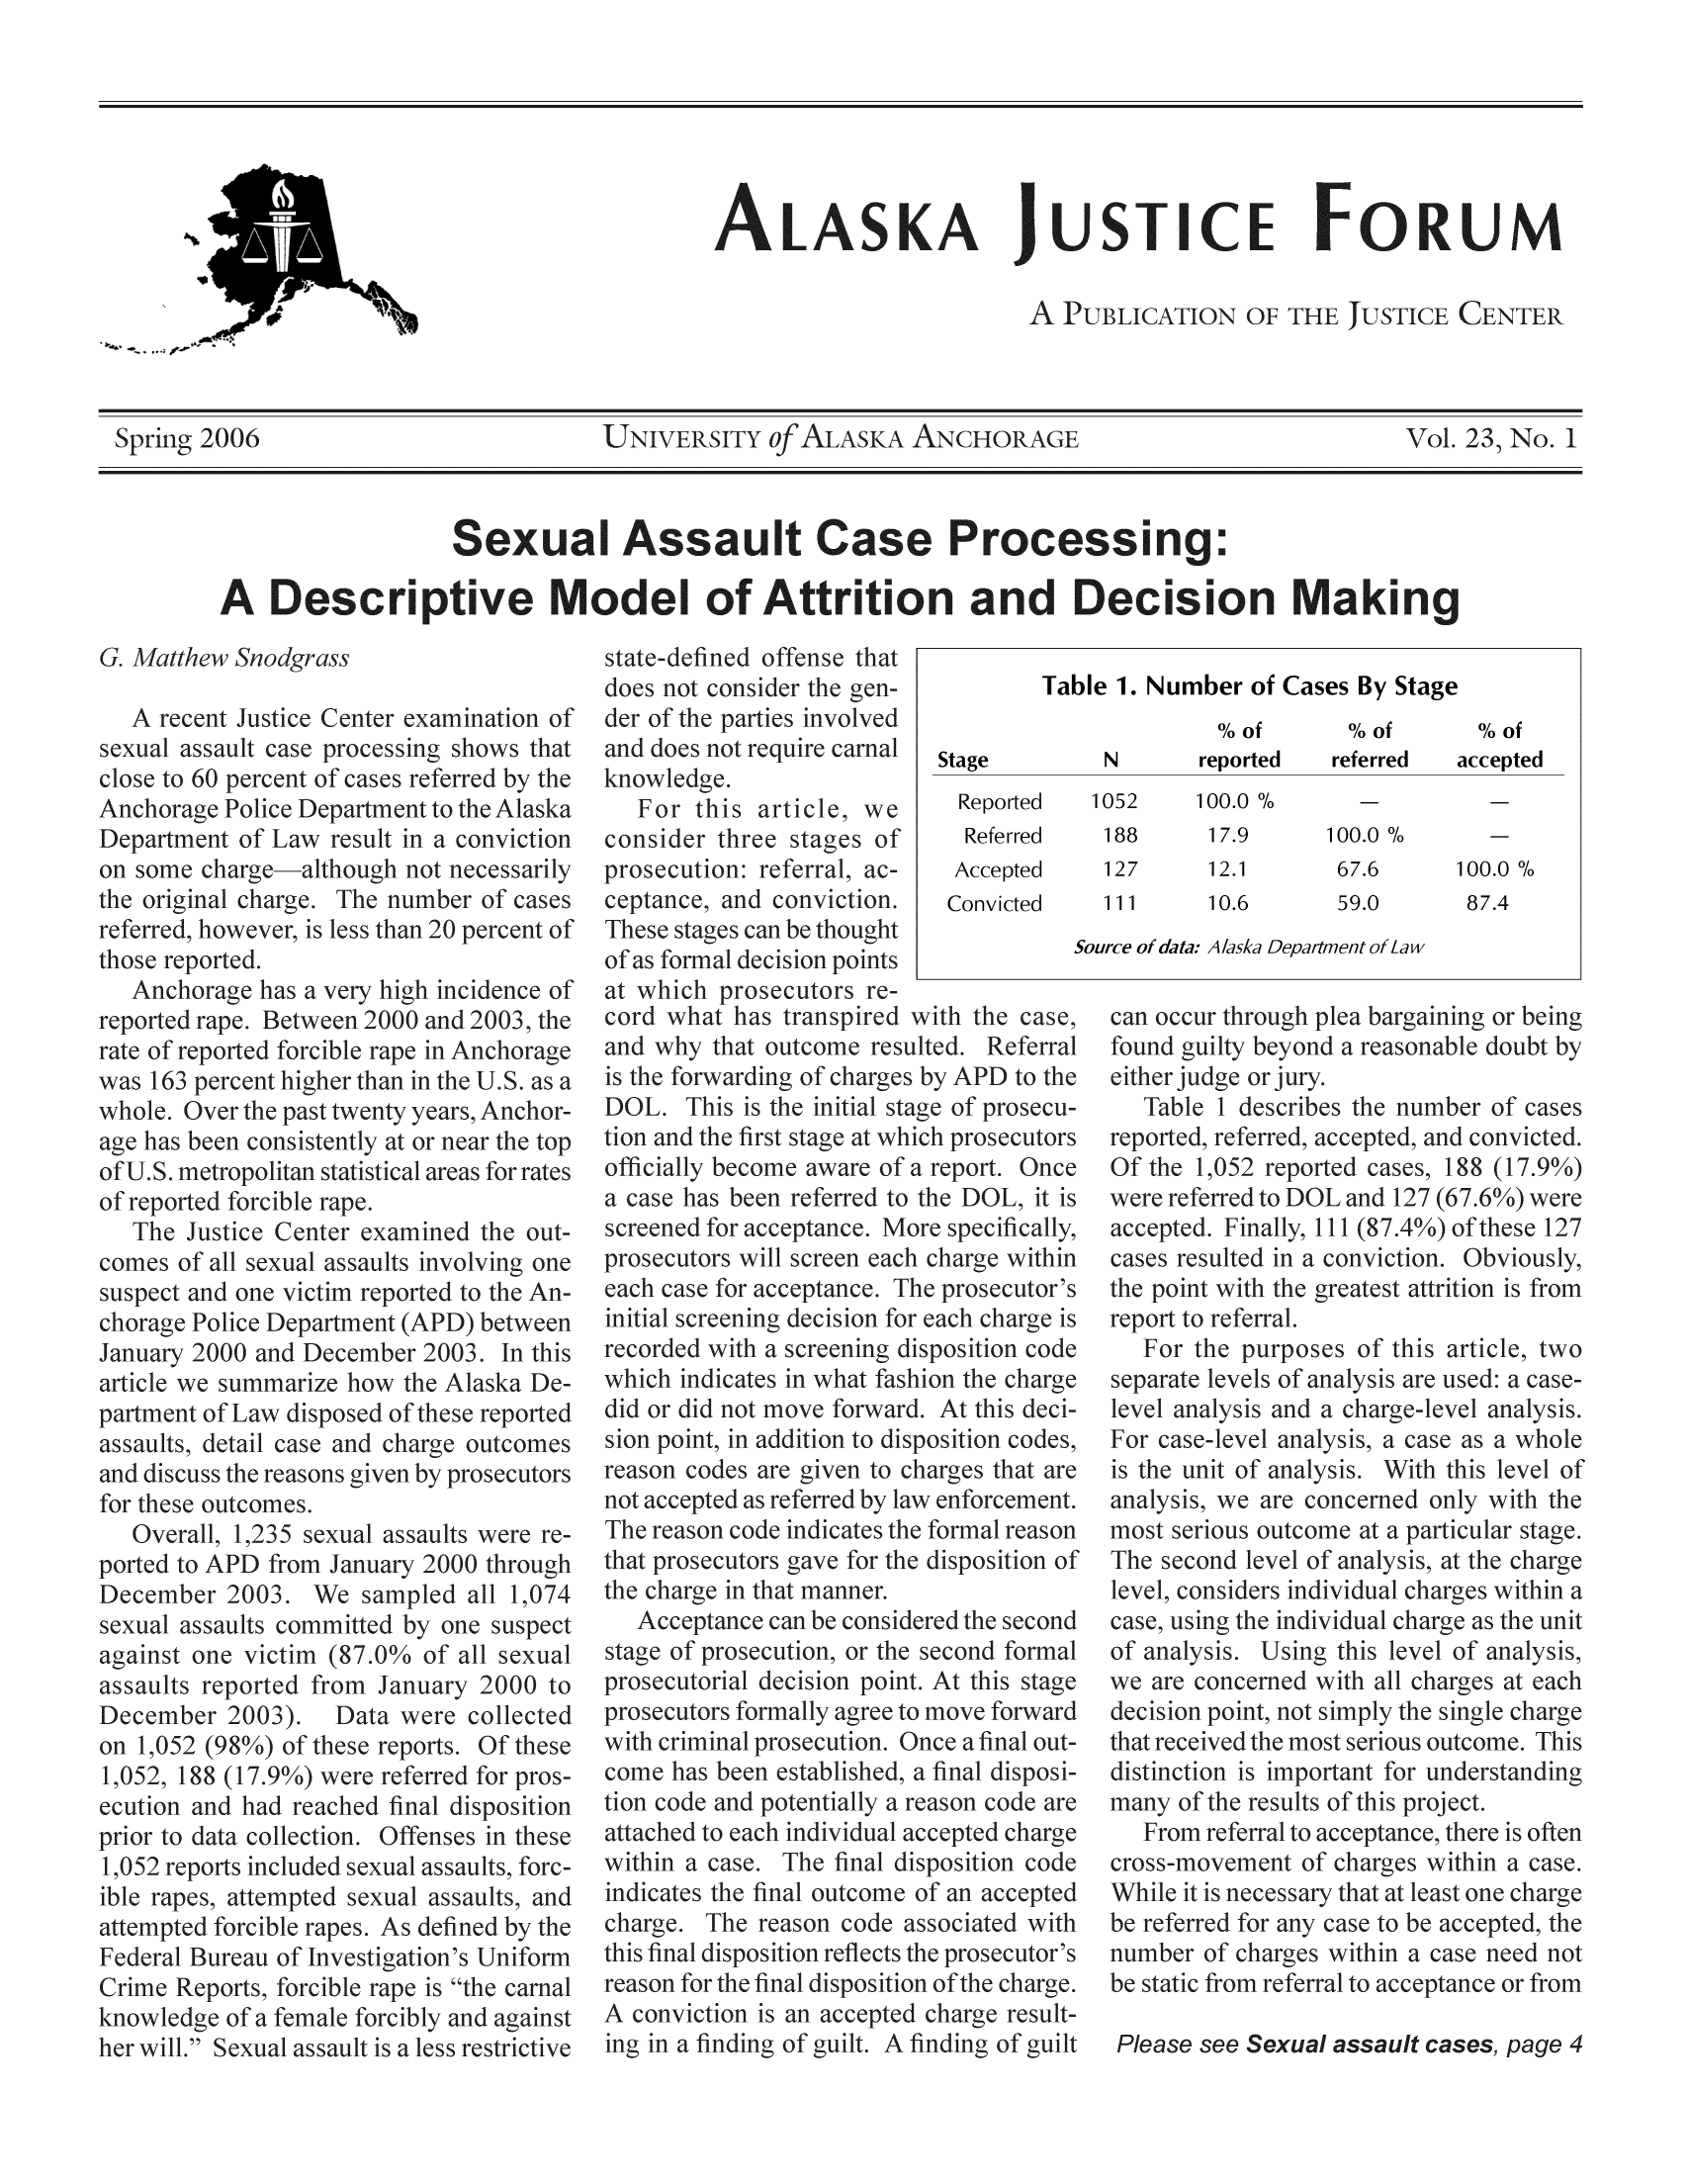 handle is hein.journals/aljufor23 and id is 1 raw text is: ALASKA JUSTICE FORUMfE JUSTICE CId006                   UNIVERSITY 0fAASKAoANCHORAGE                   Vol.Sexual Assault Case Processing.A Descriptive Model of Attrition and Decision Makingw Snodgrass            state-defined offense thatault case pr(Spercent o f,Police Depcias a very highBetween 2000a[ forcible rape i)politan statiForcible rapef   der of the pCStageer of cases  ceptanpercent of Theseof as fcyears, Anchor- DO]or near the top  tional areas for rates  office     Reportedf      ReferredAcceptedConvictedTable 1. Number of Cases By Stage% of       % of       % ofN       reported   referred   acceptedSource of data: Alaska Department of Lawize how the Alaskasposed of these repe and charge outcons given by prosectpC(87.0% ofgh   that prspe-pted as refffor the disposition of.eptanA proal ospcon reflects the prosecui1 disposition of the chC-in accepted charge re:)f vuilt. A findinv, of 4thati is important forhe results of this preferral to acceptanc,eferred foiber of chtatic fromSexual assault cases,SprinPUBLIhose reporteAnchorag-eported rapcrote of reporwas 163 percwhole. Overige has been:fU.S. metro:f reported fi1052188127111100.0 %17.912.110.6pC100.0 %67.659.0100.0 %87.4ferral   fostage of pr(v0ich prose)f a report.to the DOIeported, ref)f the 1,052for acceptaors will scr(. for acceptpartment ofepceferred to DOept(188 (17.90(87.4%) of Ieport to reffepael ofvlof,pr1,052 (980)52, 188 (Fution and fior to data ()52 reportsjle rapes, ati-empted for(eports. Of th(eferred for prfinal dispositiformal ofpCaptape:ports, ft:e of a feal cdispcfor thefte:ptance or fr